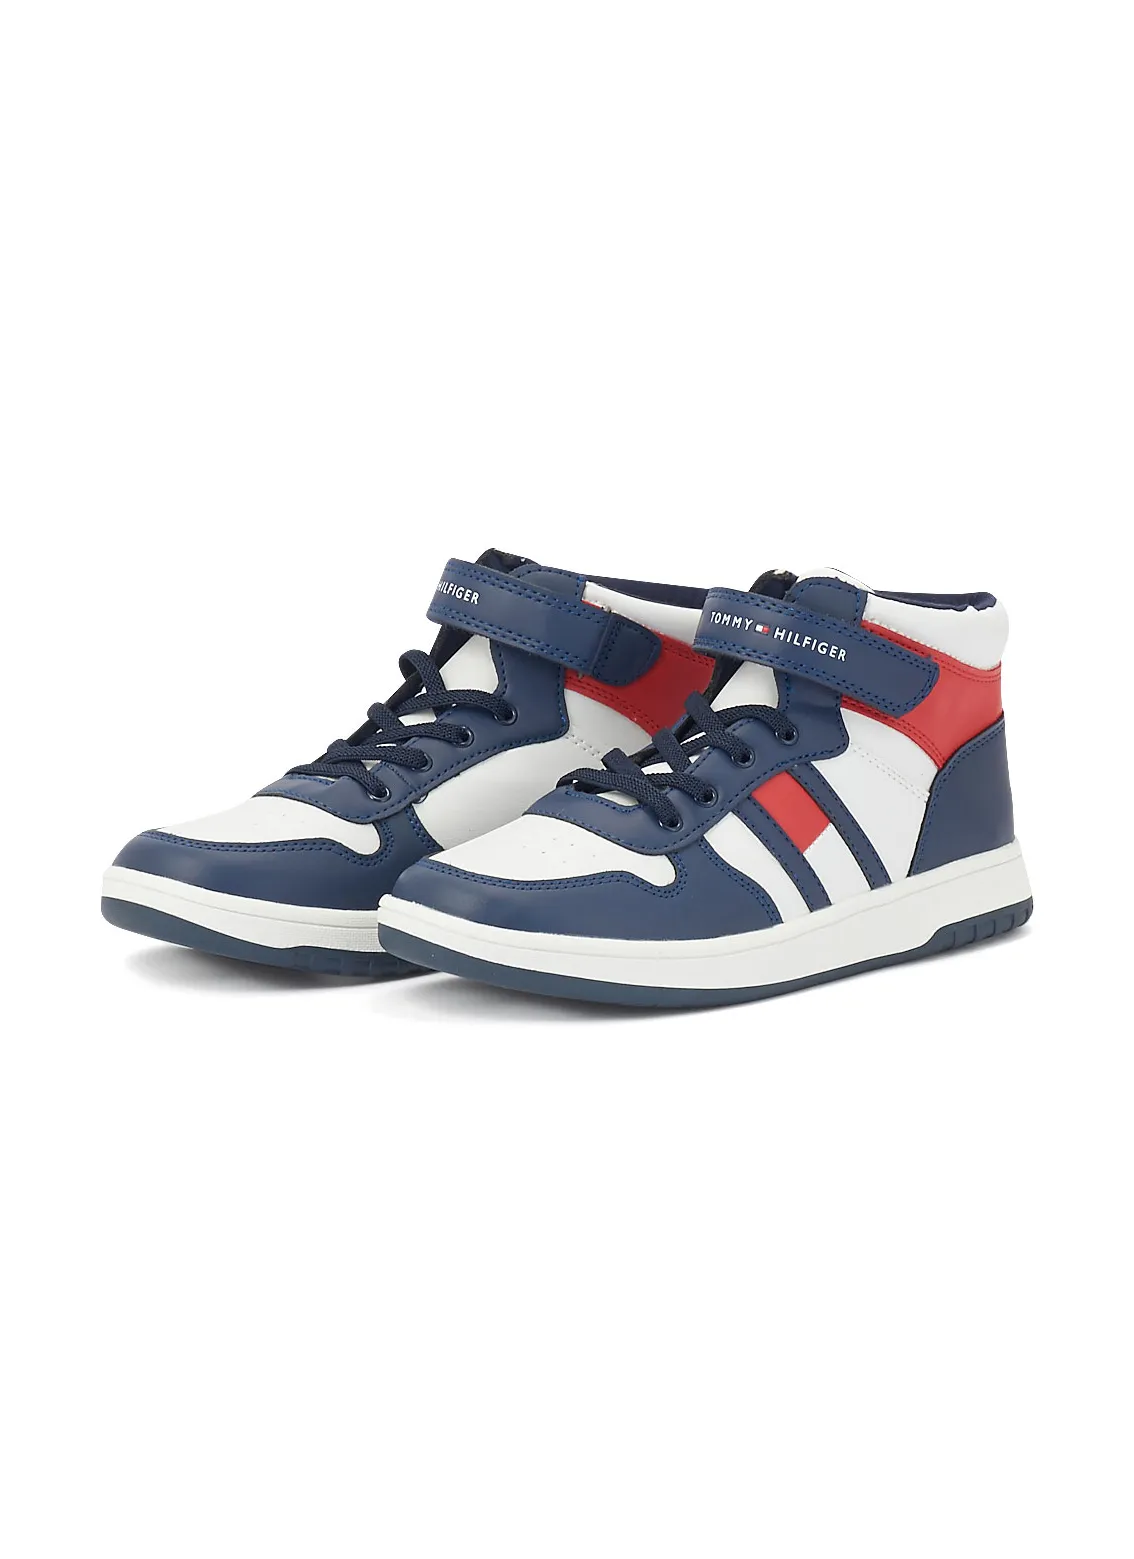 TOMMY HILFIGER High Top Lace up/Velcro Youth Sneakers - Blue/White/Red |  Choice+Attitude | Sneaker high